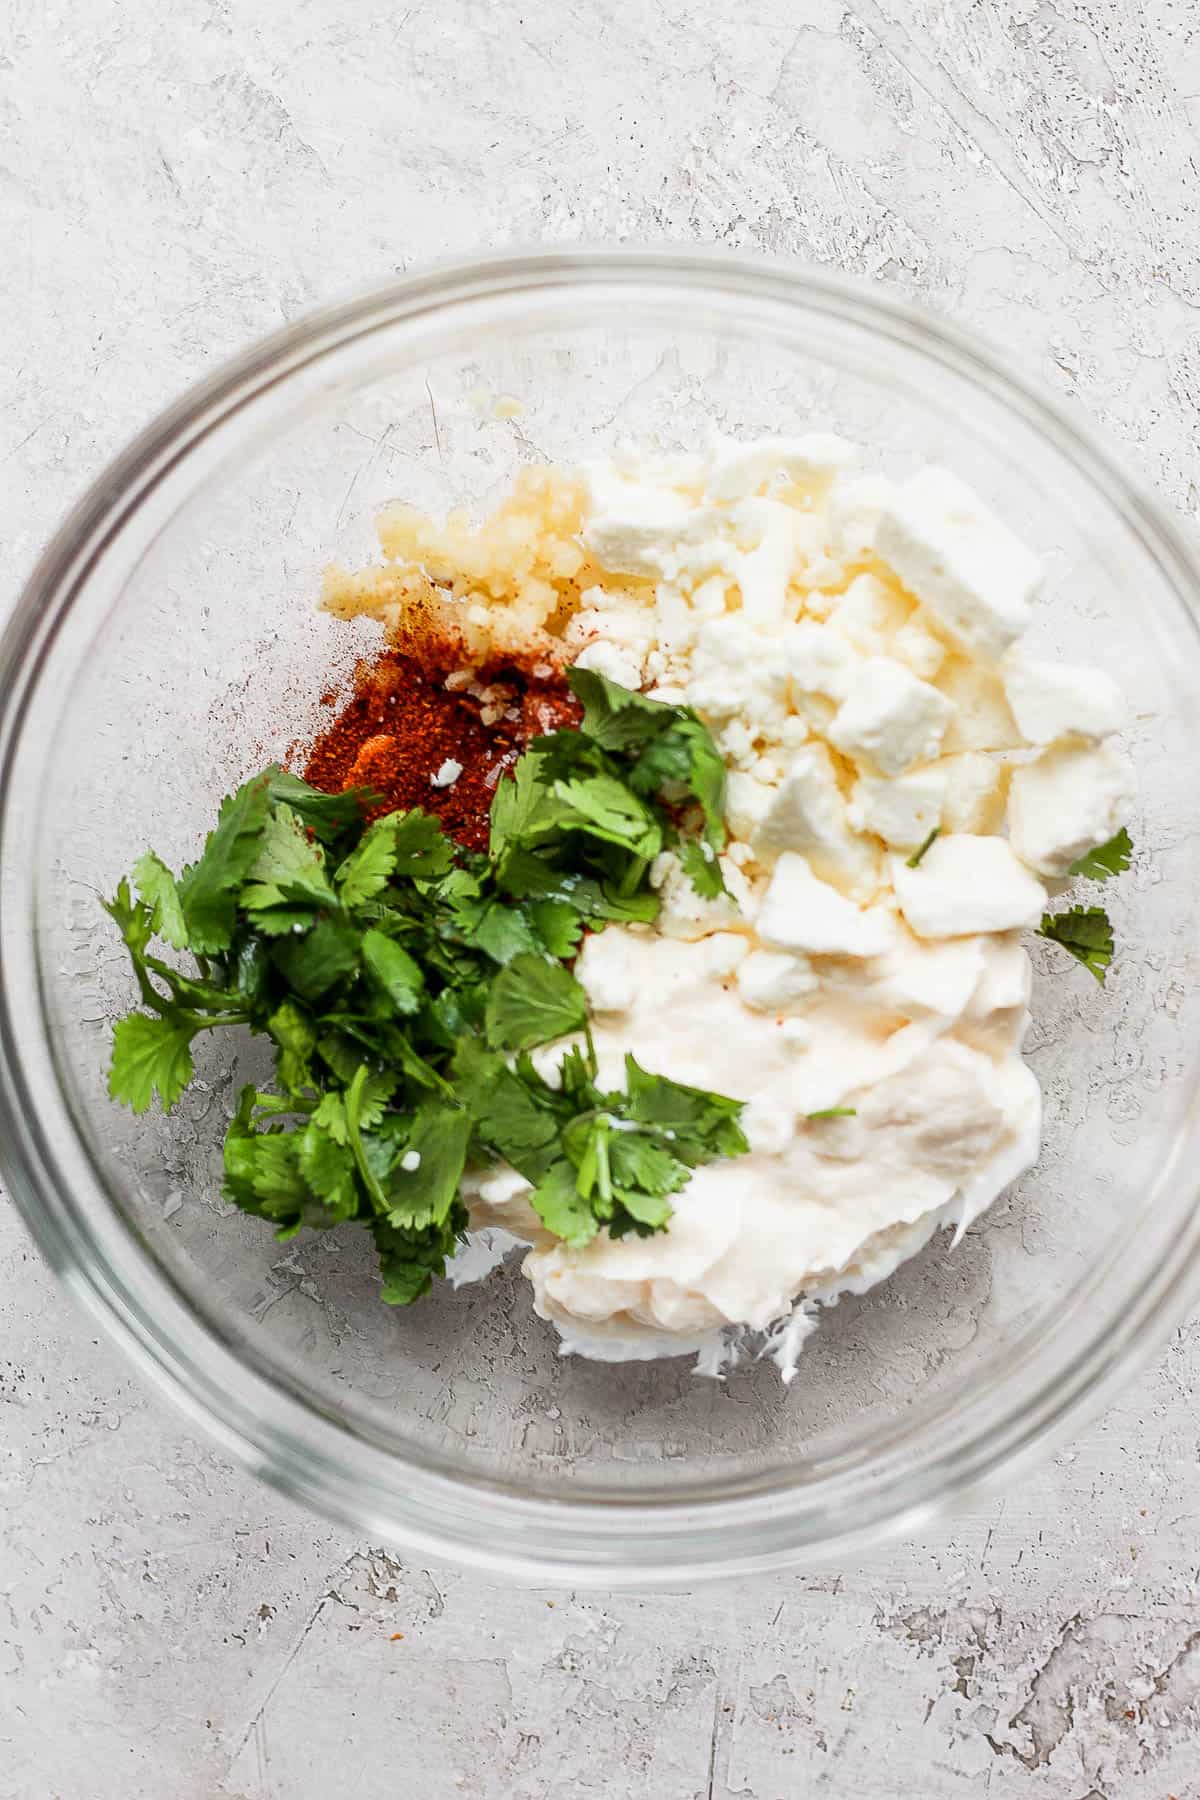 Mayo, feta, cilantro, and spices in a mixing bowl.